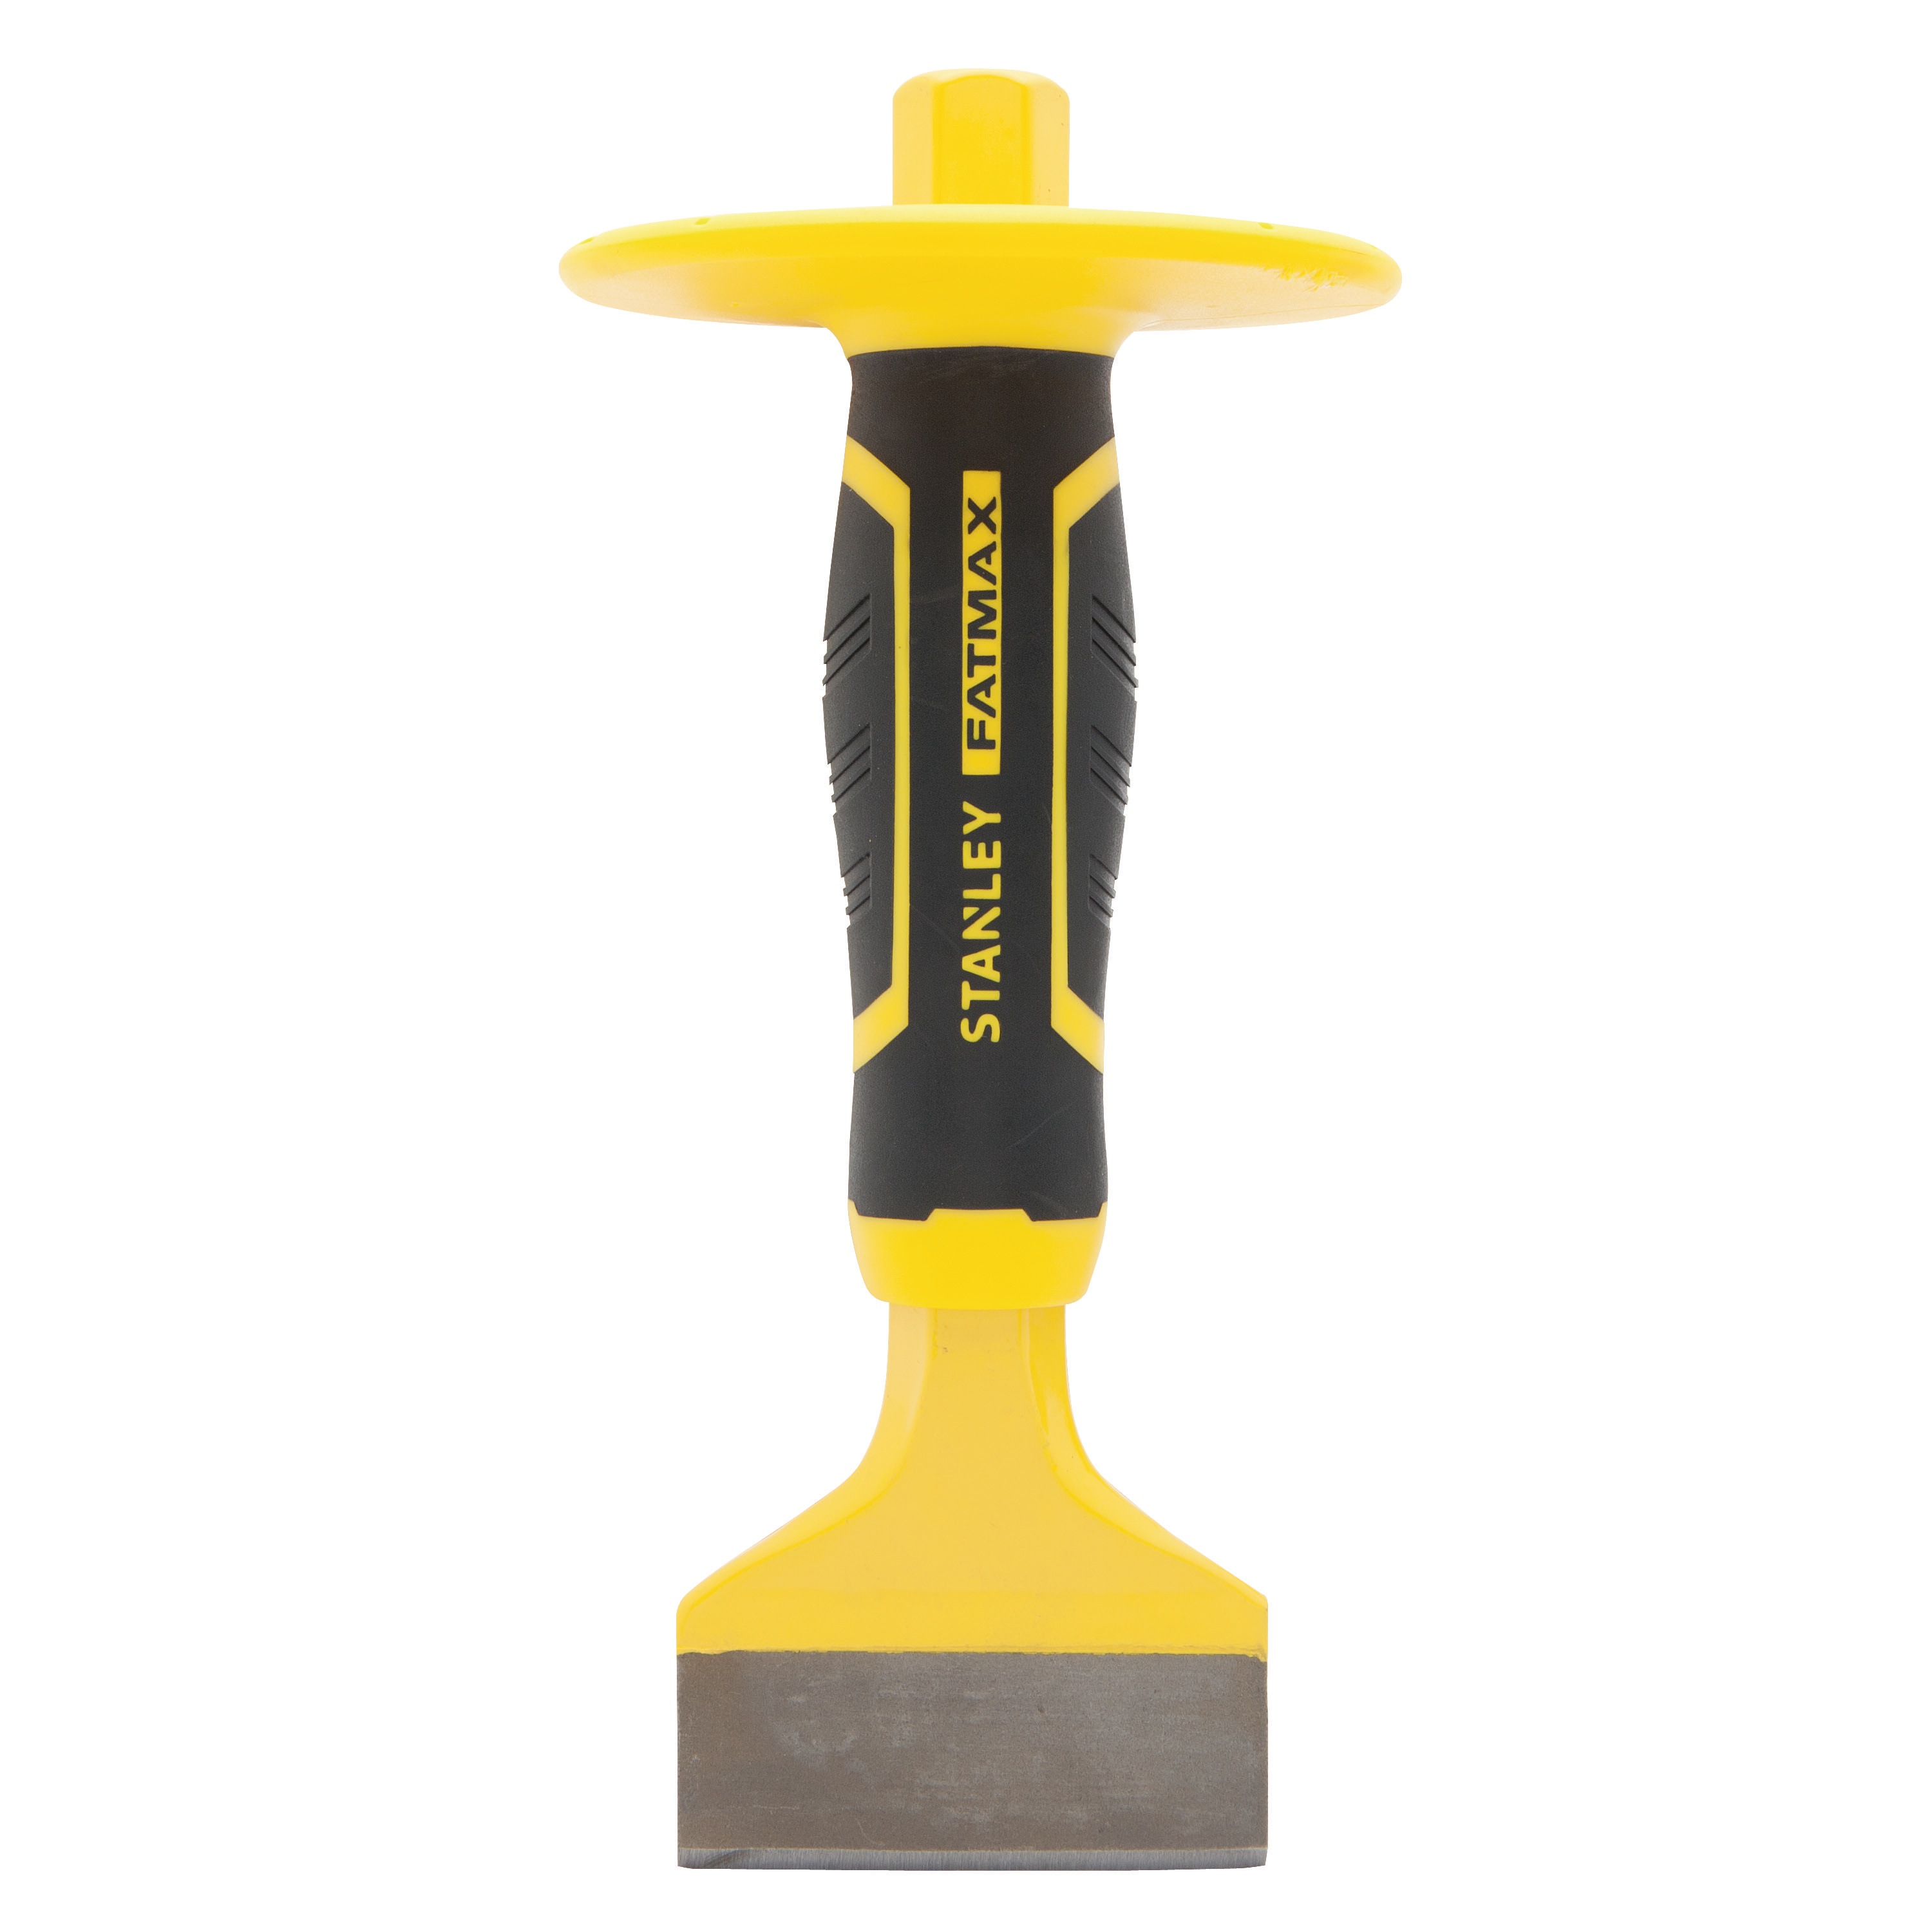 Stanley Tools - 234 in FATMAX Masons Chisel with Guard - FMHT16569